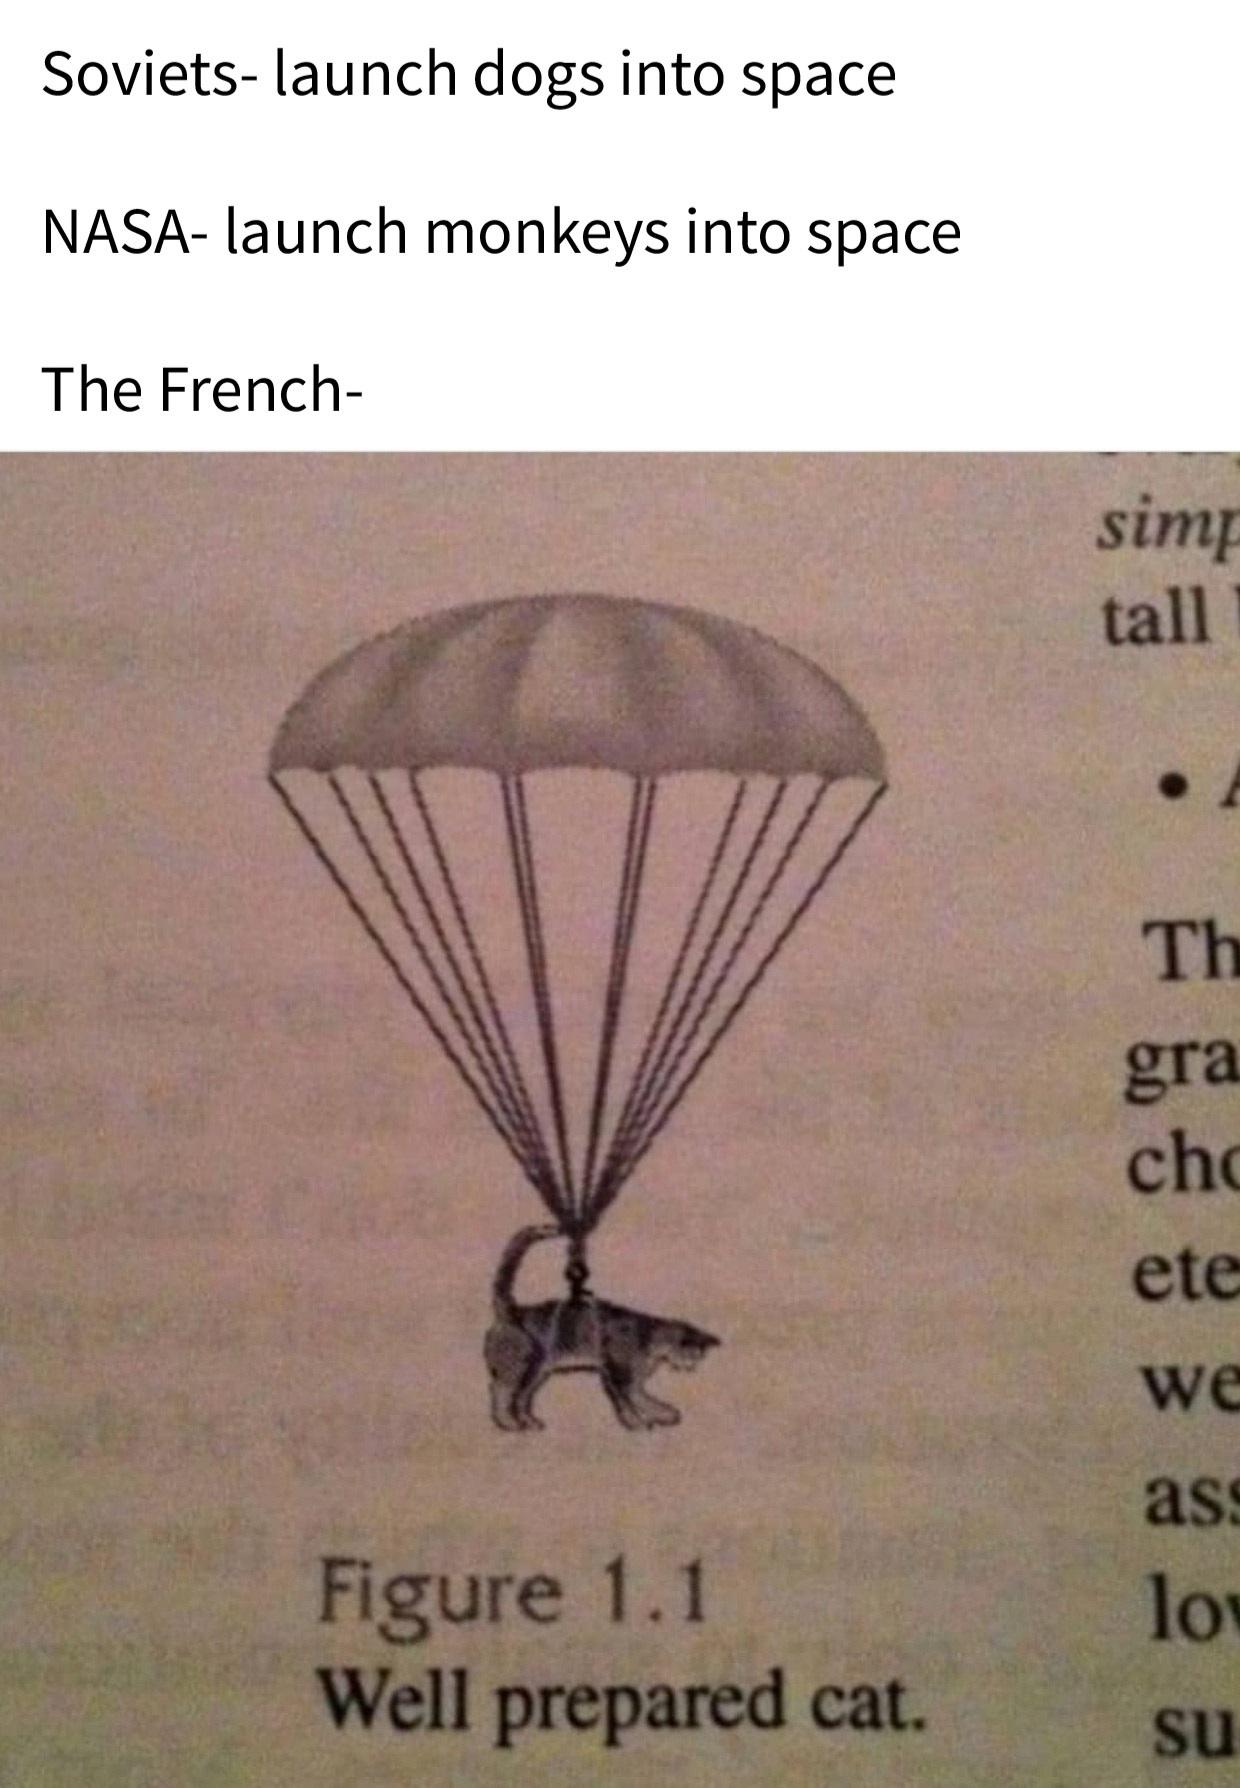 well prepared cat - Sovietslaunch dogs into space Nasalaunch monkeys into space The French sim tall Th gra cho ete we ass lo Figure 1.1 Well prepared cat. su